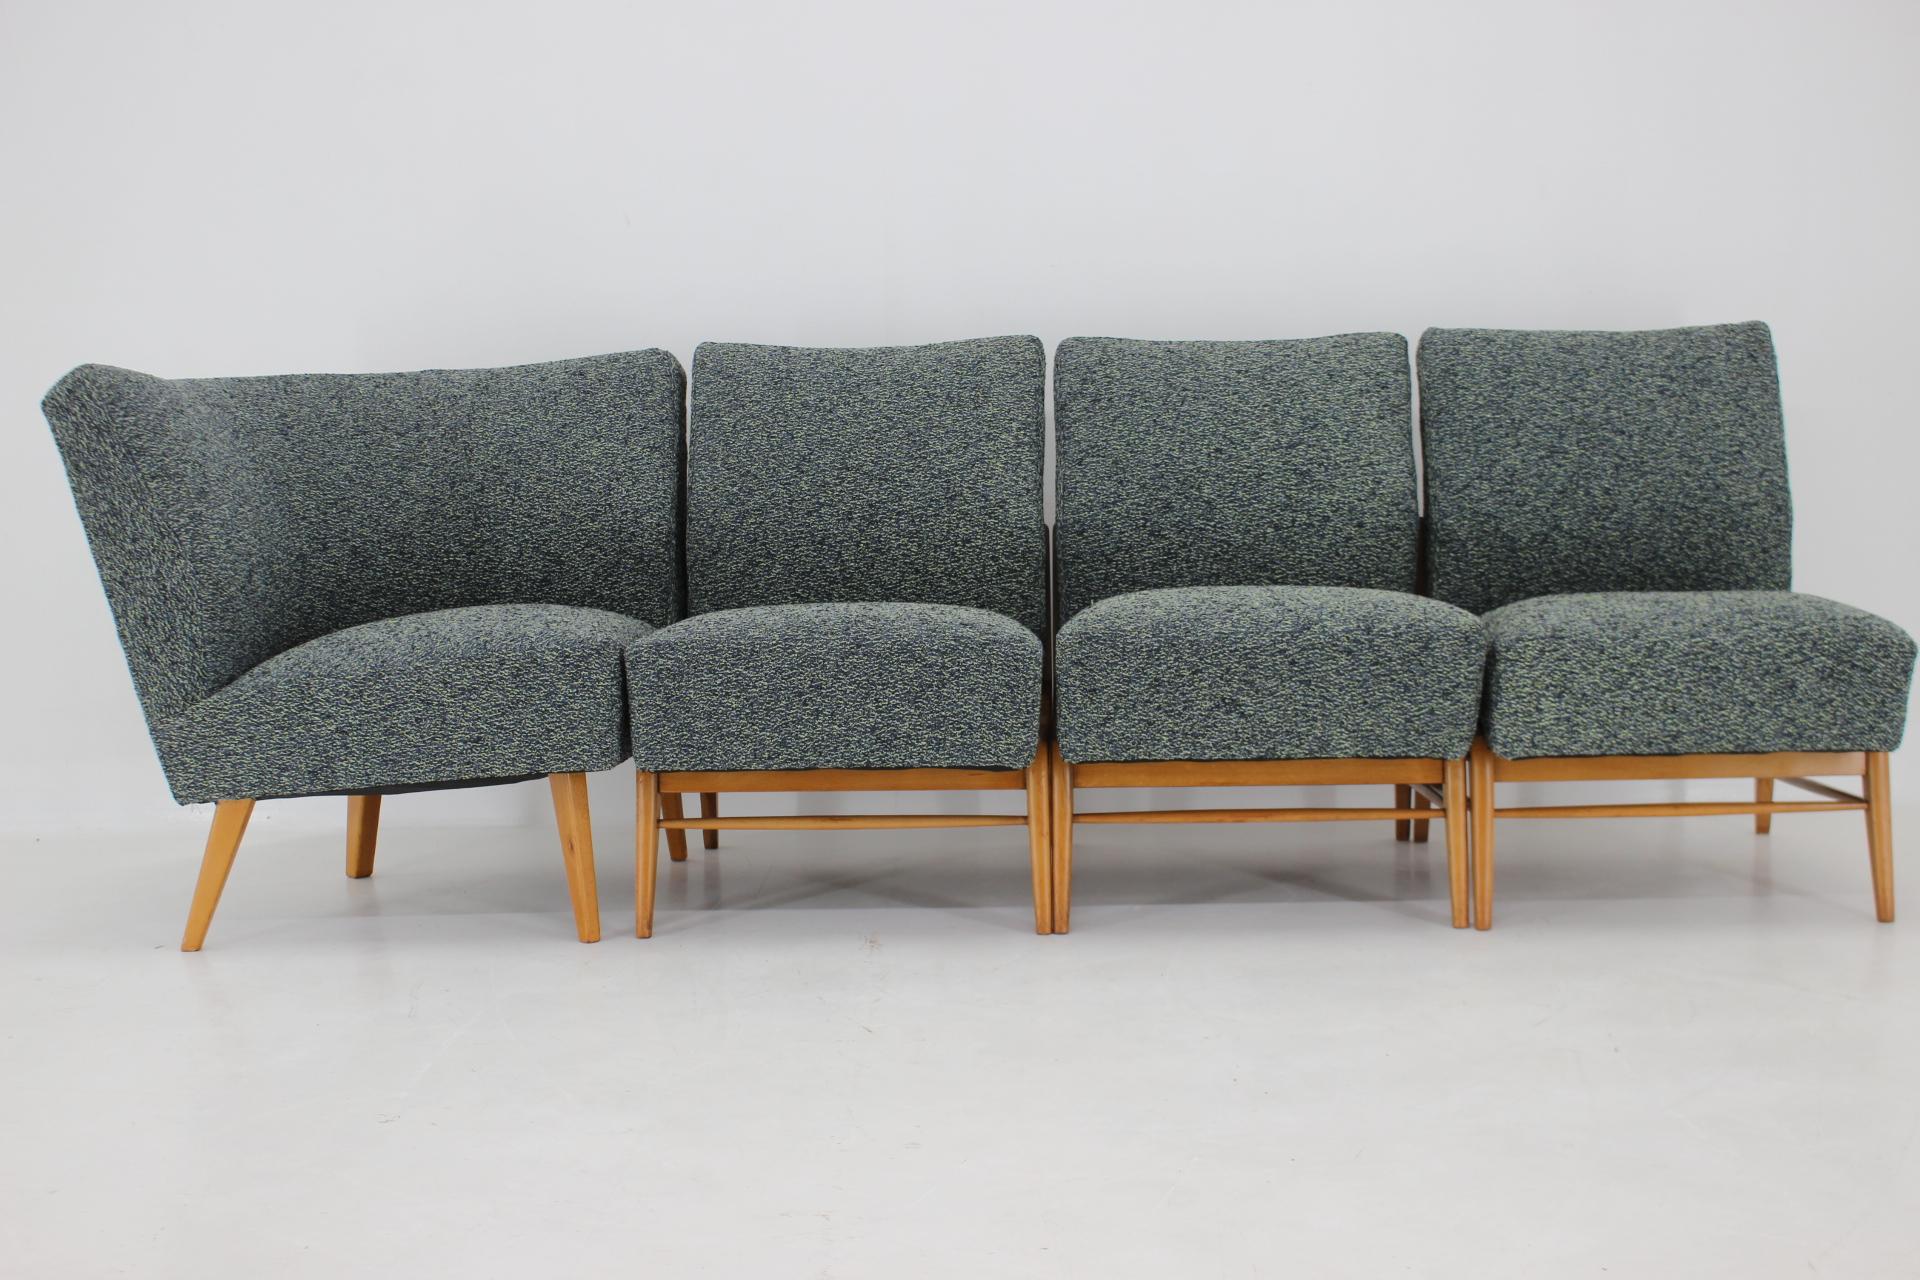 1970s Modular Sofa or Chairs in Beech wood and Kirgby Fabric, Czechoslovakia In Good Condition For Sale In Praha, CZ